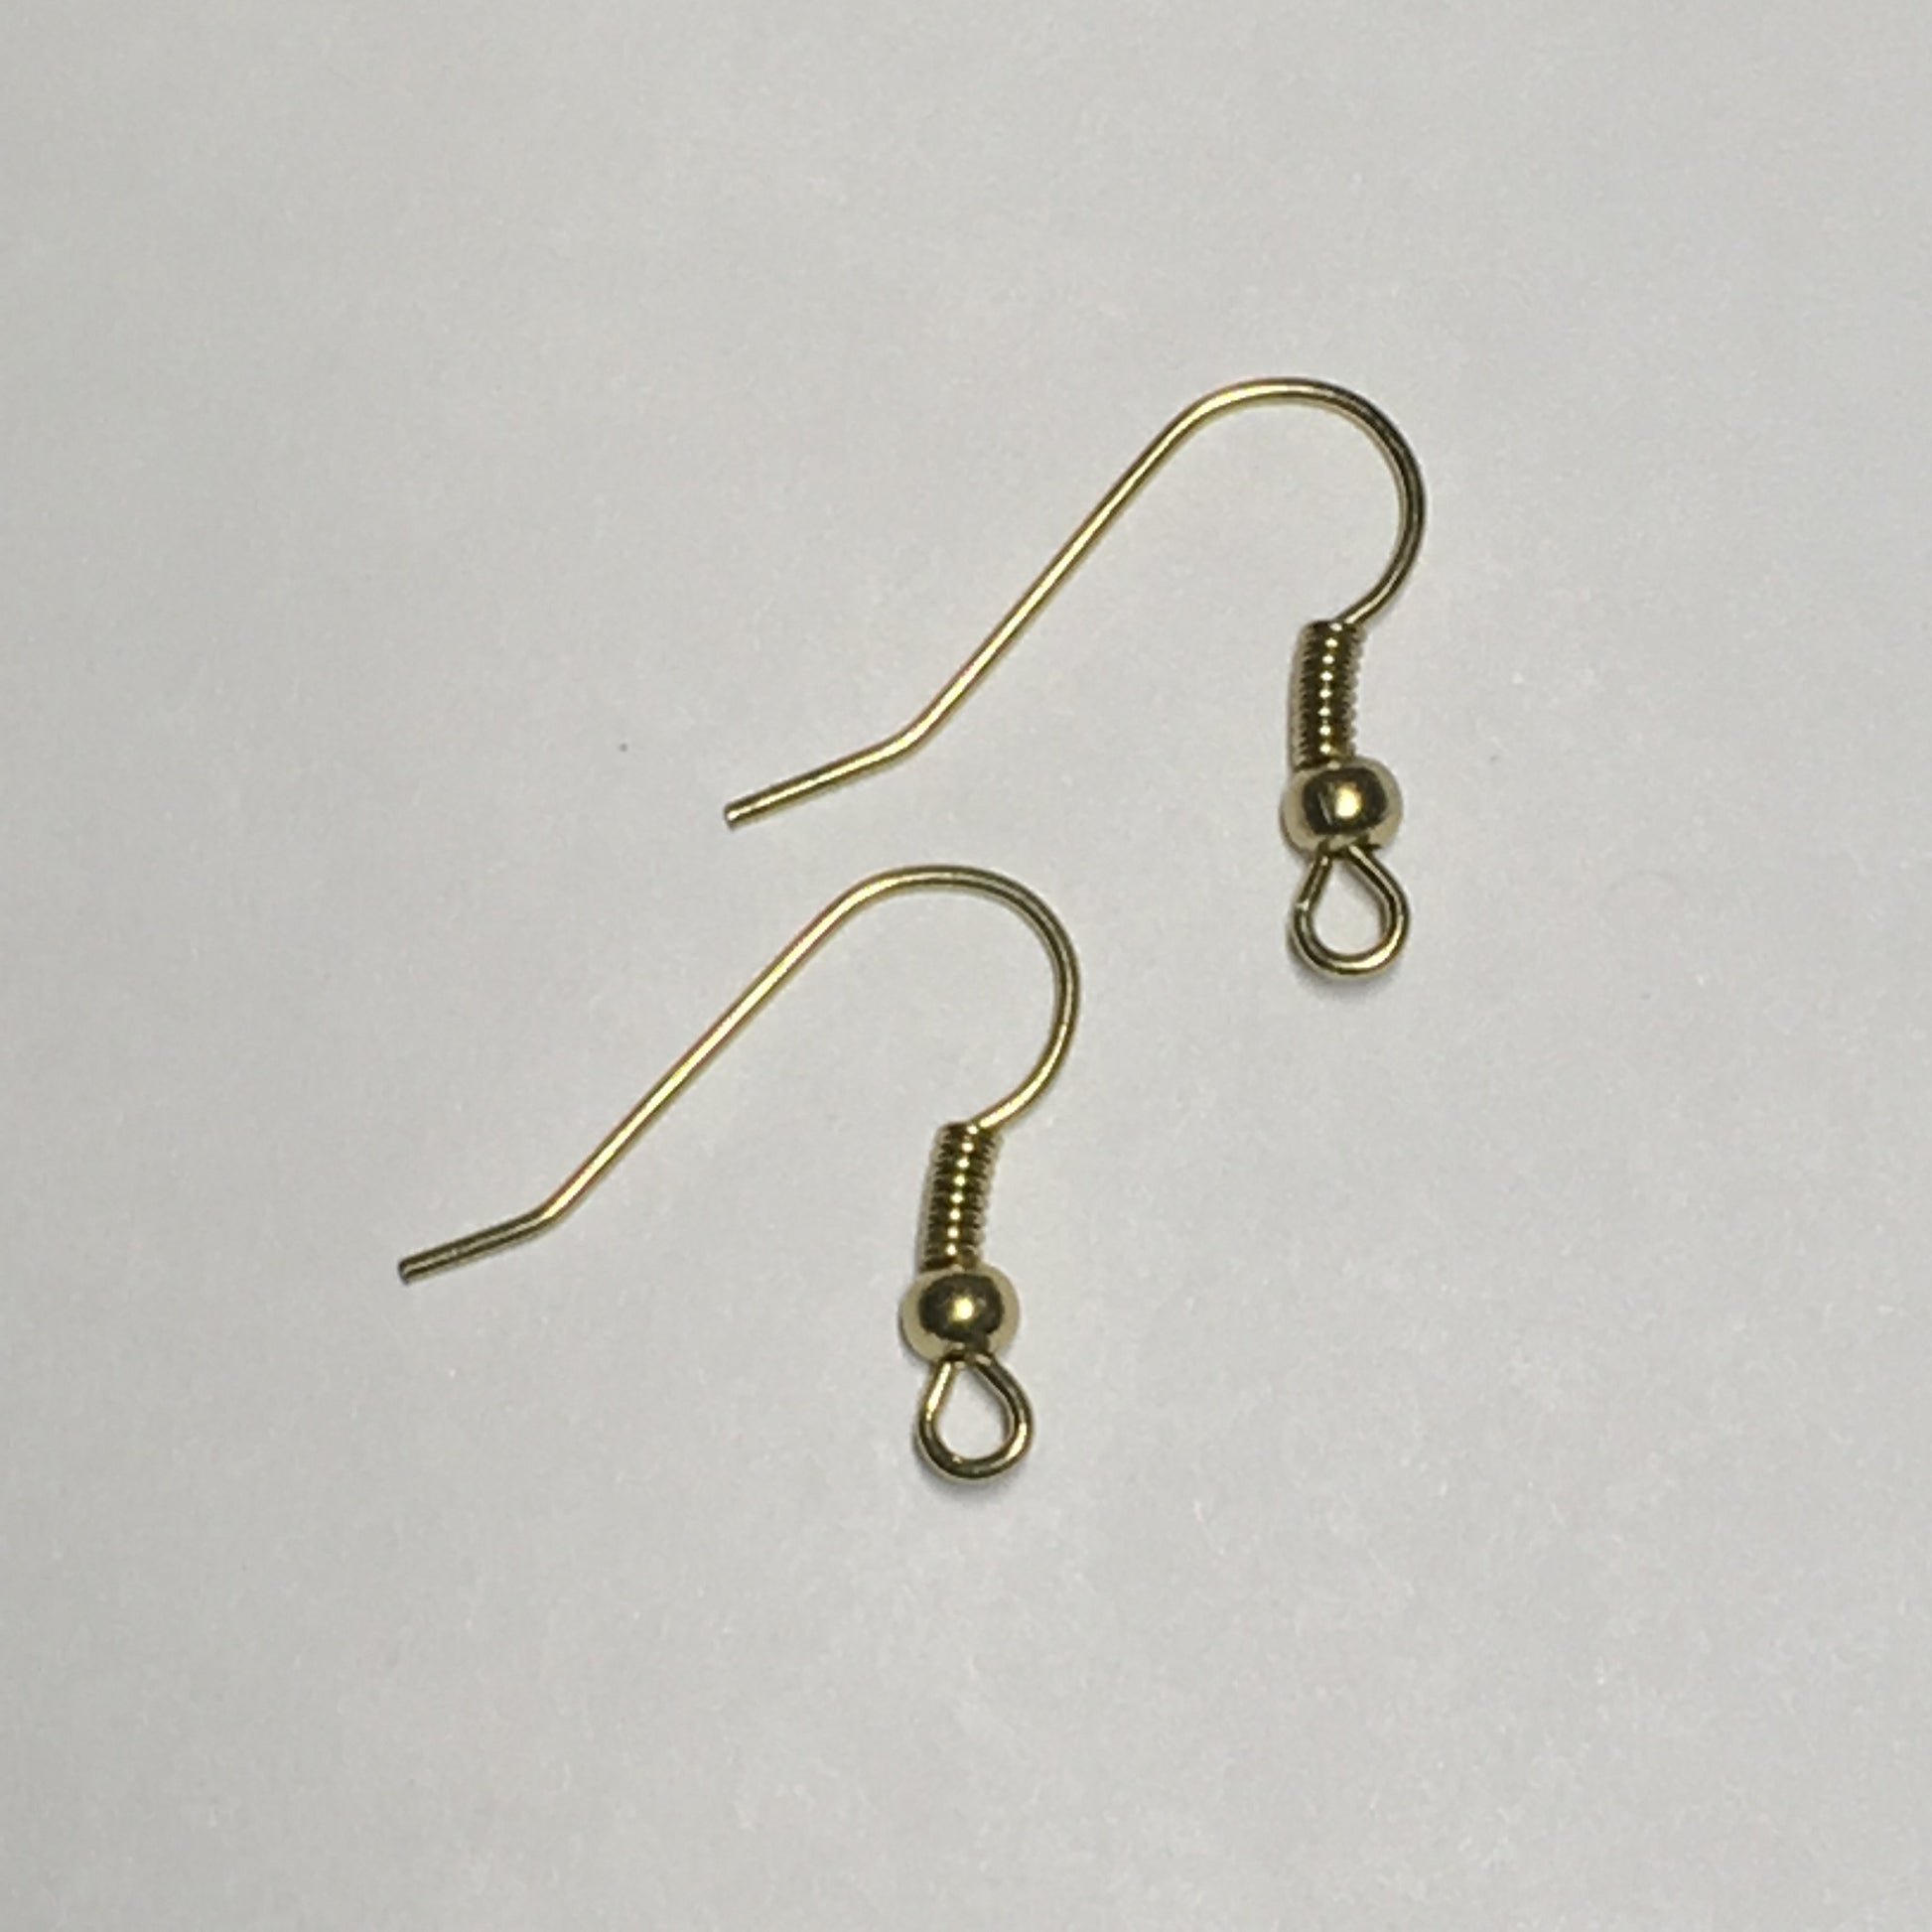 21-Gauge 18 mm Pale Gold Finish French Fish Hook Ear Wires - 1 or 5 Pa –